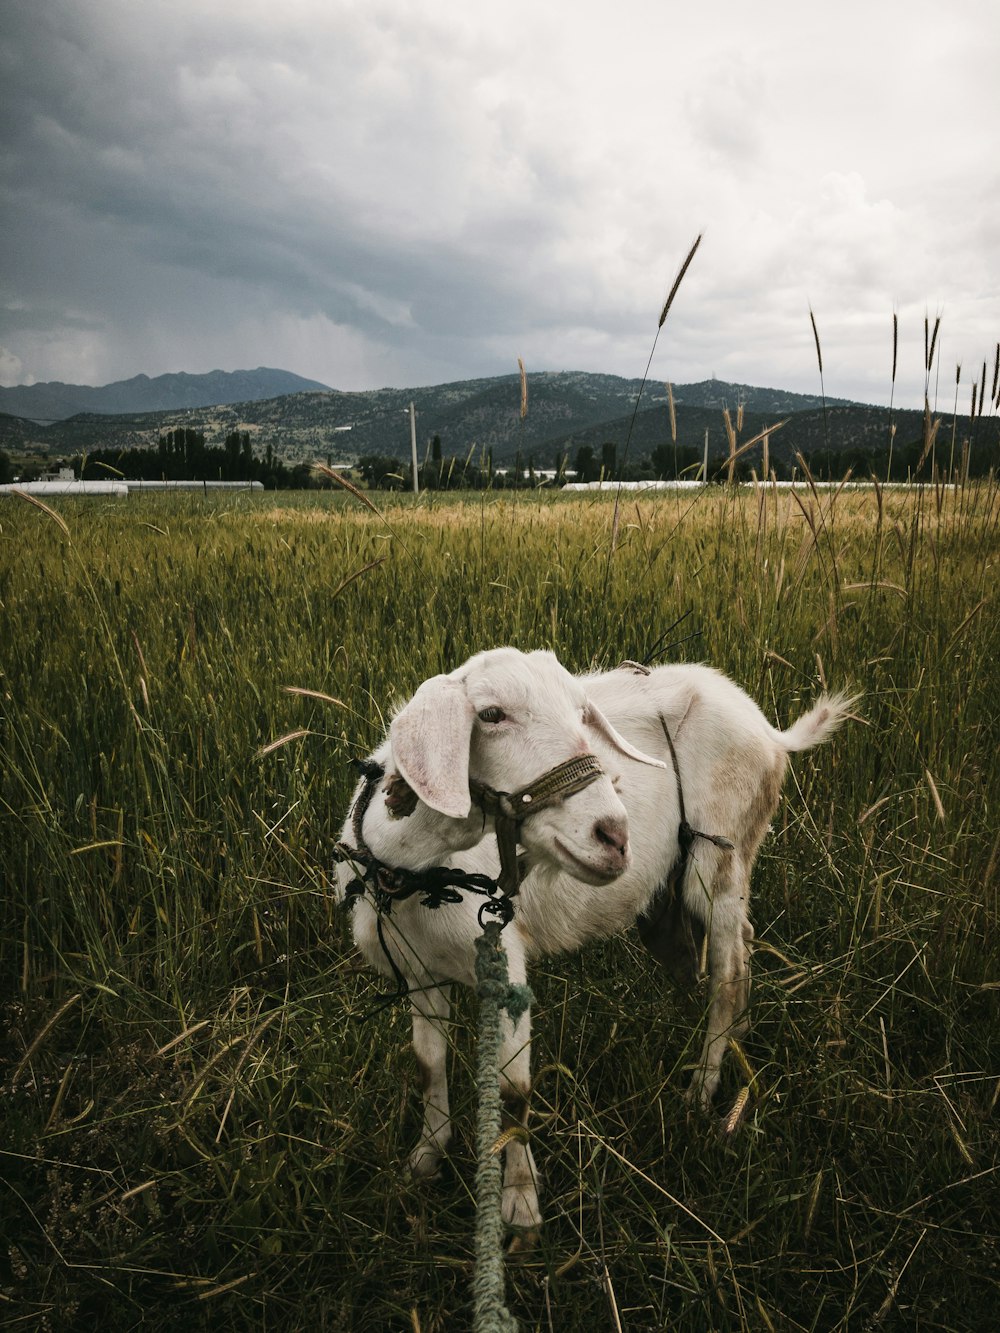 white goat with tie on green field